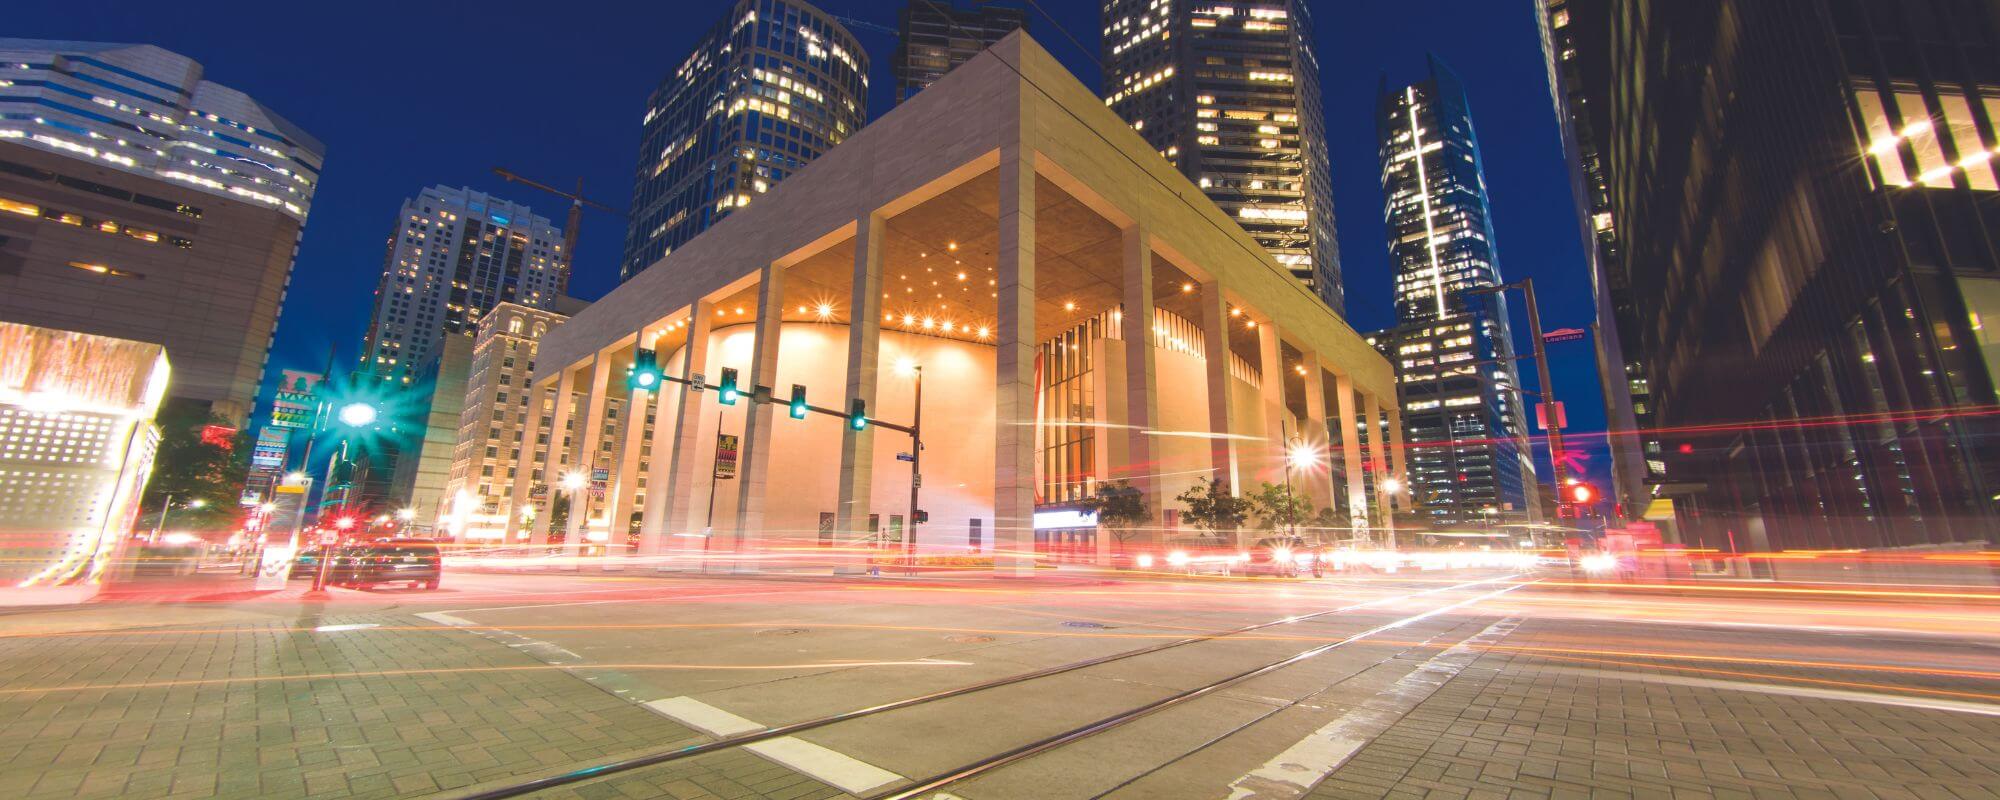 Performing Arts Houston building. A tall white building with white pillars all around.